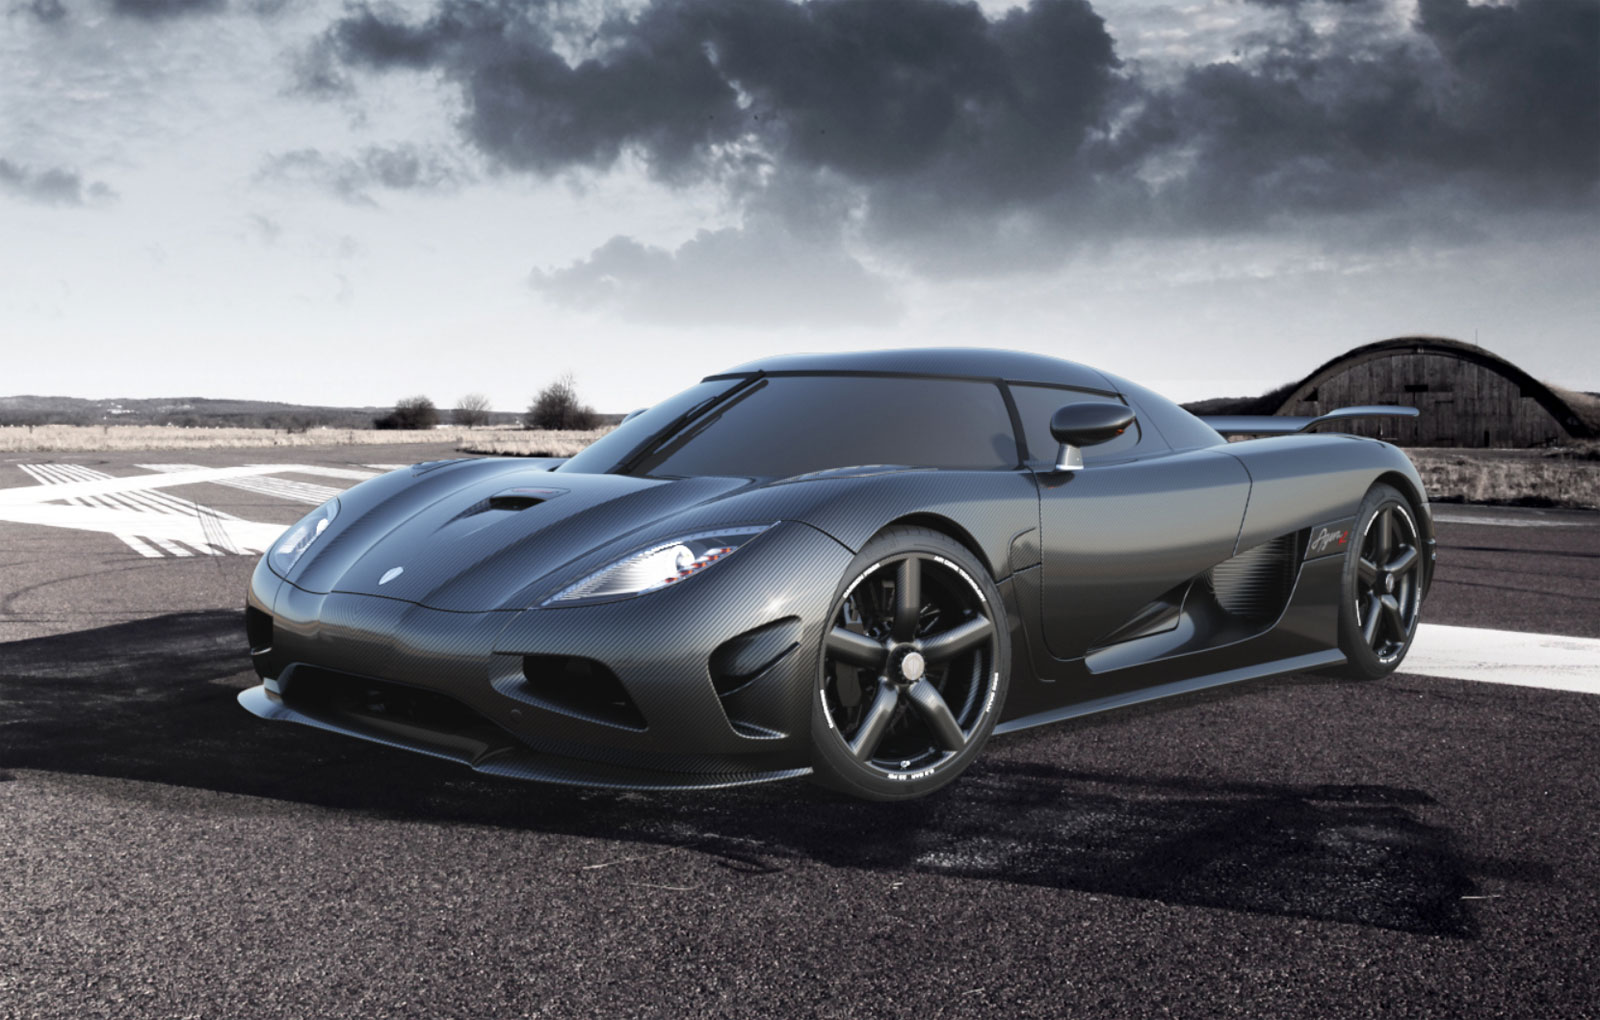 Sport Cars Koenigsegg Agera R Hd Wallpapers 2013 Images, Photos, Reviews